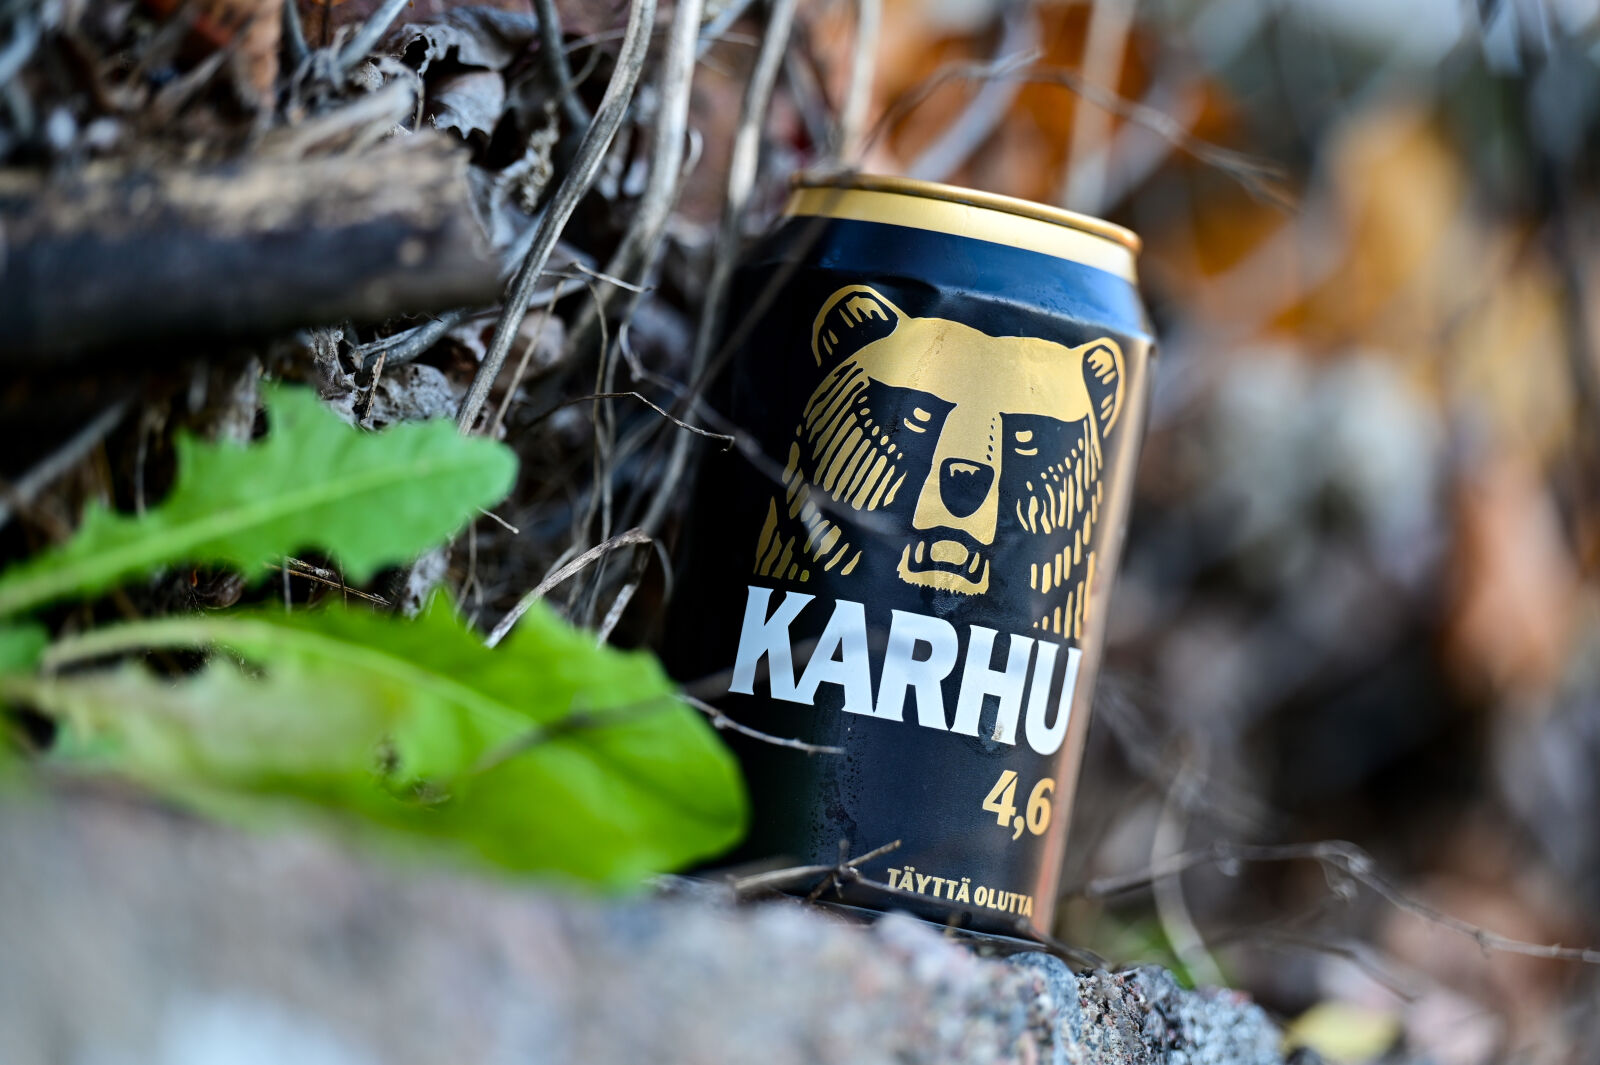 Nikon Z6 II sample photo. Nature calls for beer photography